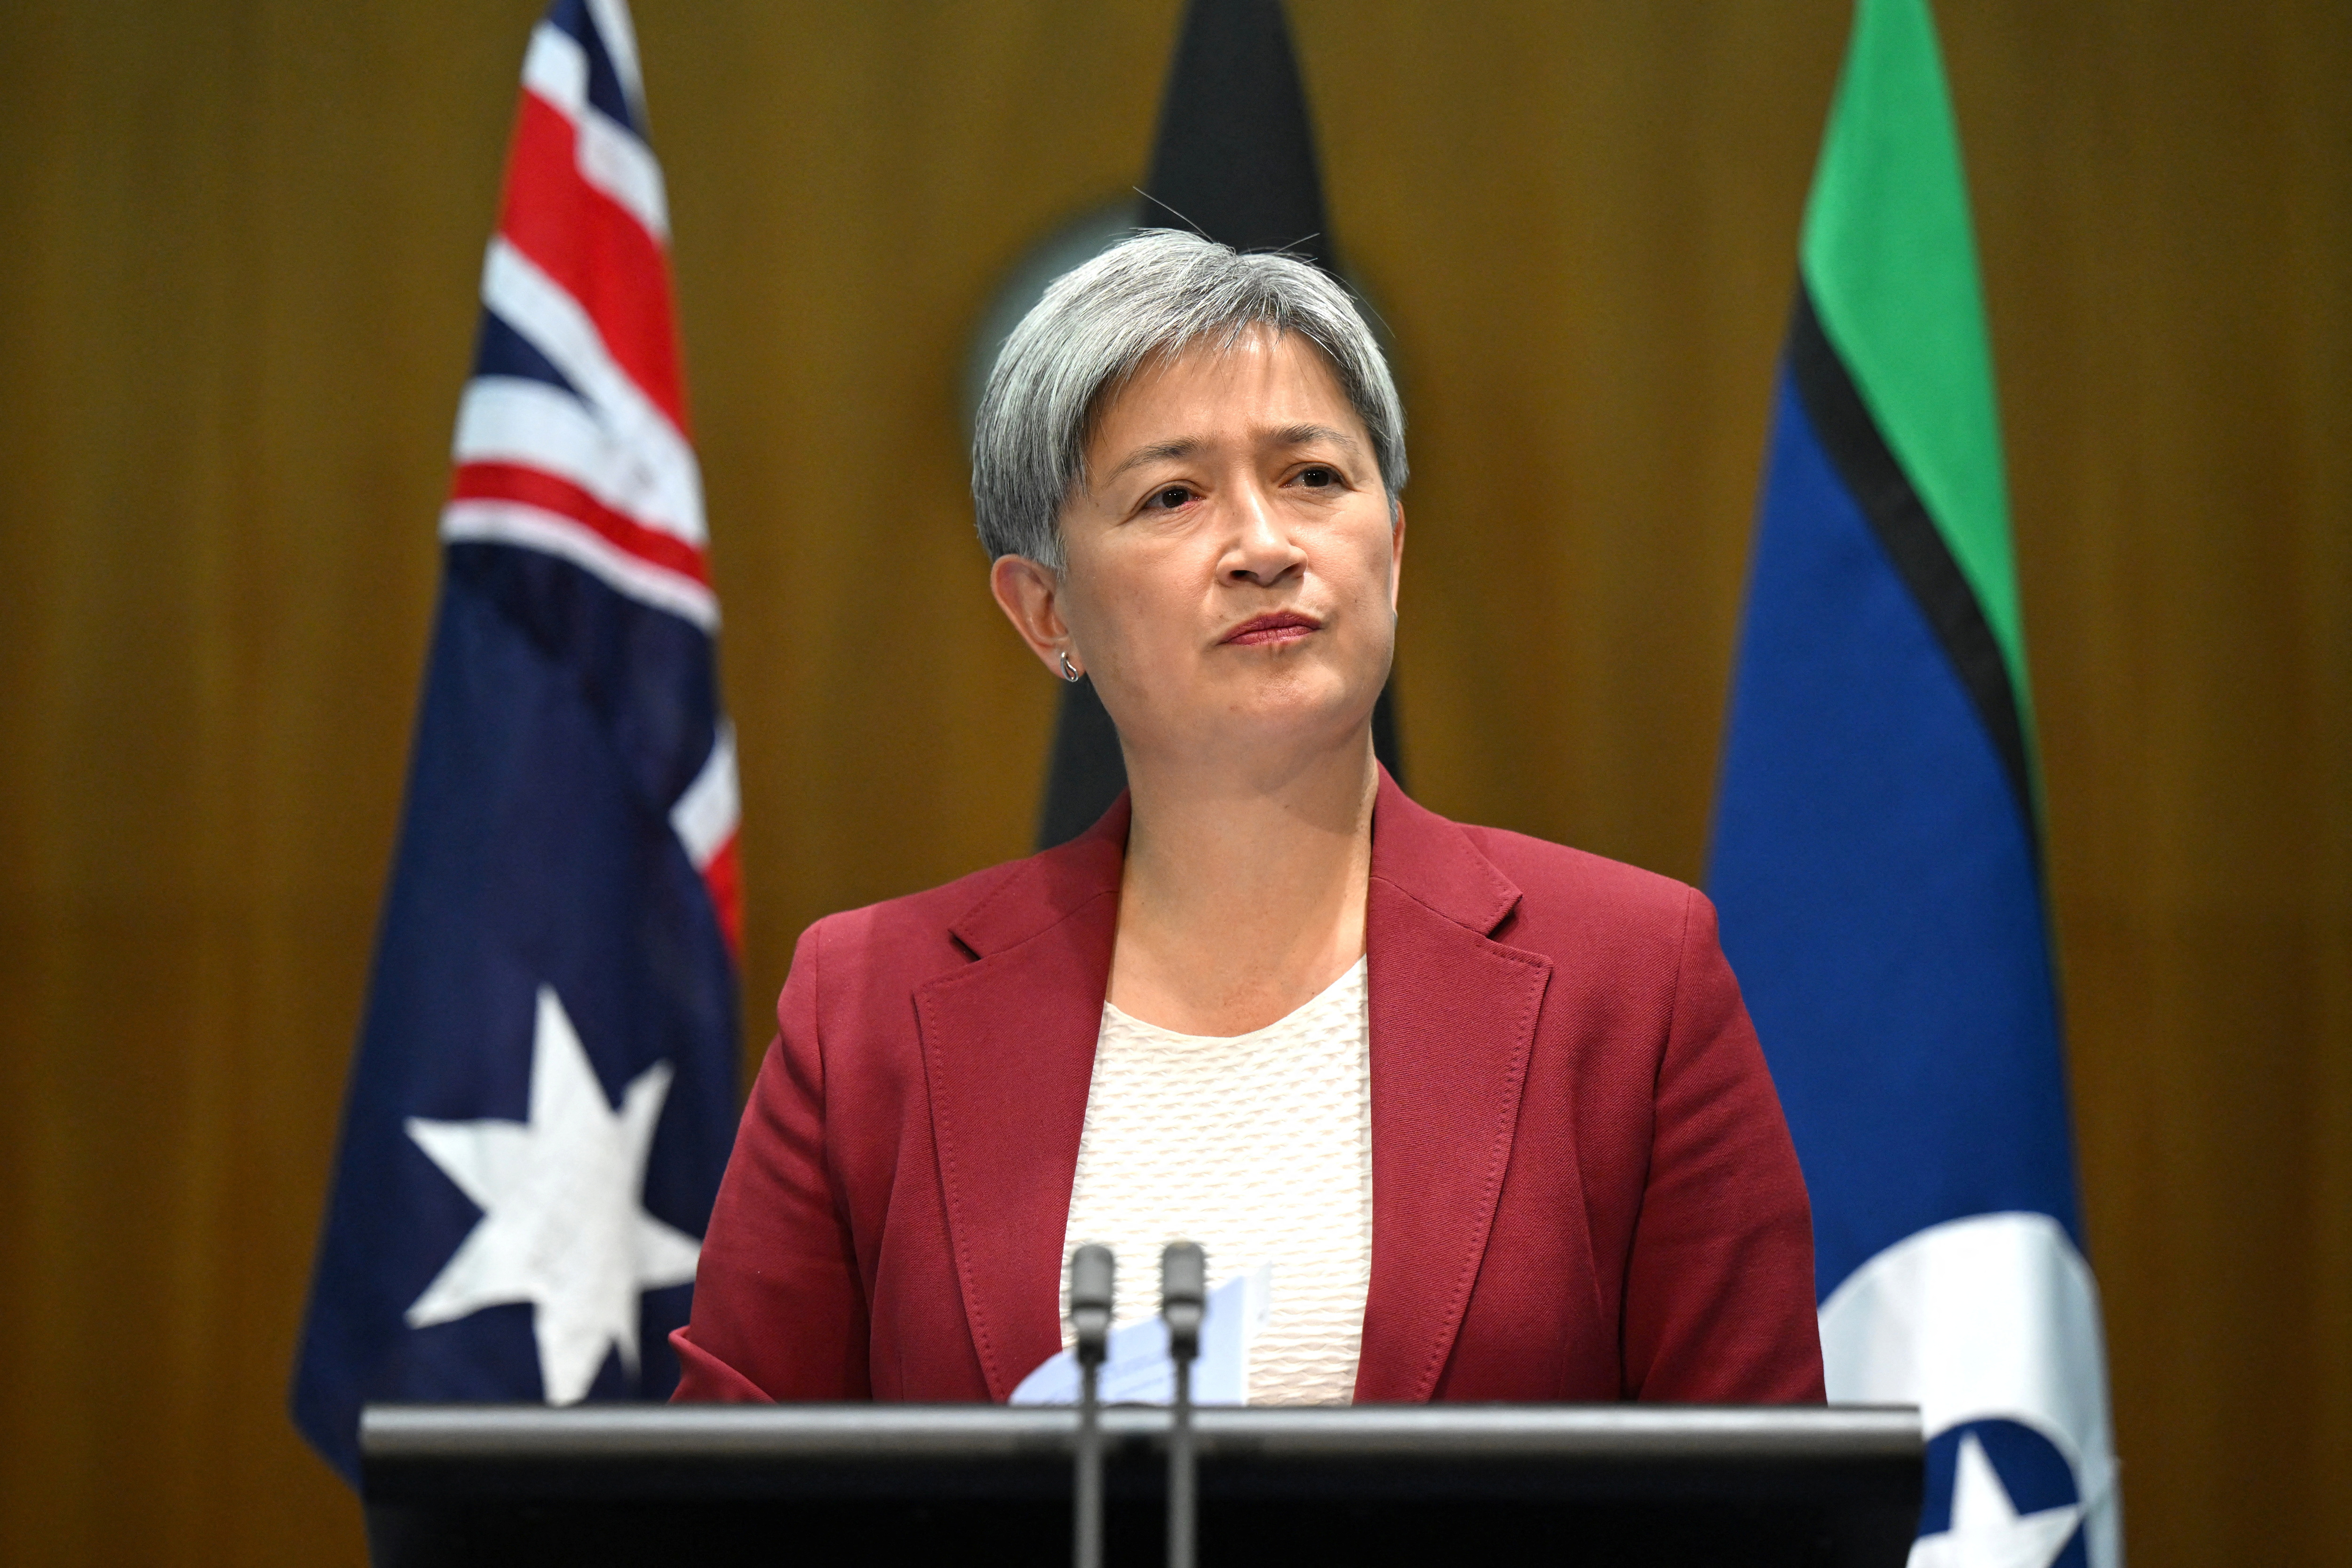 Australian Foreign Minister Penny Wong speaks to the media after holding a bilateral meeting with Chinese Foreign Minister Wang Yi at Parliament House, in Canberra